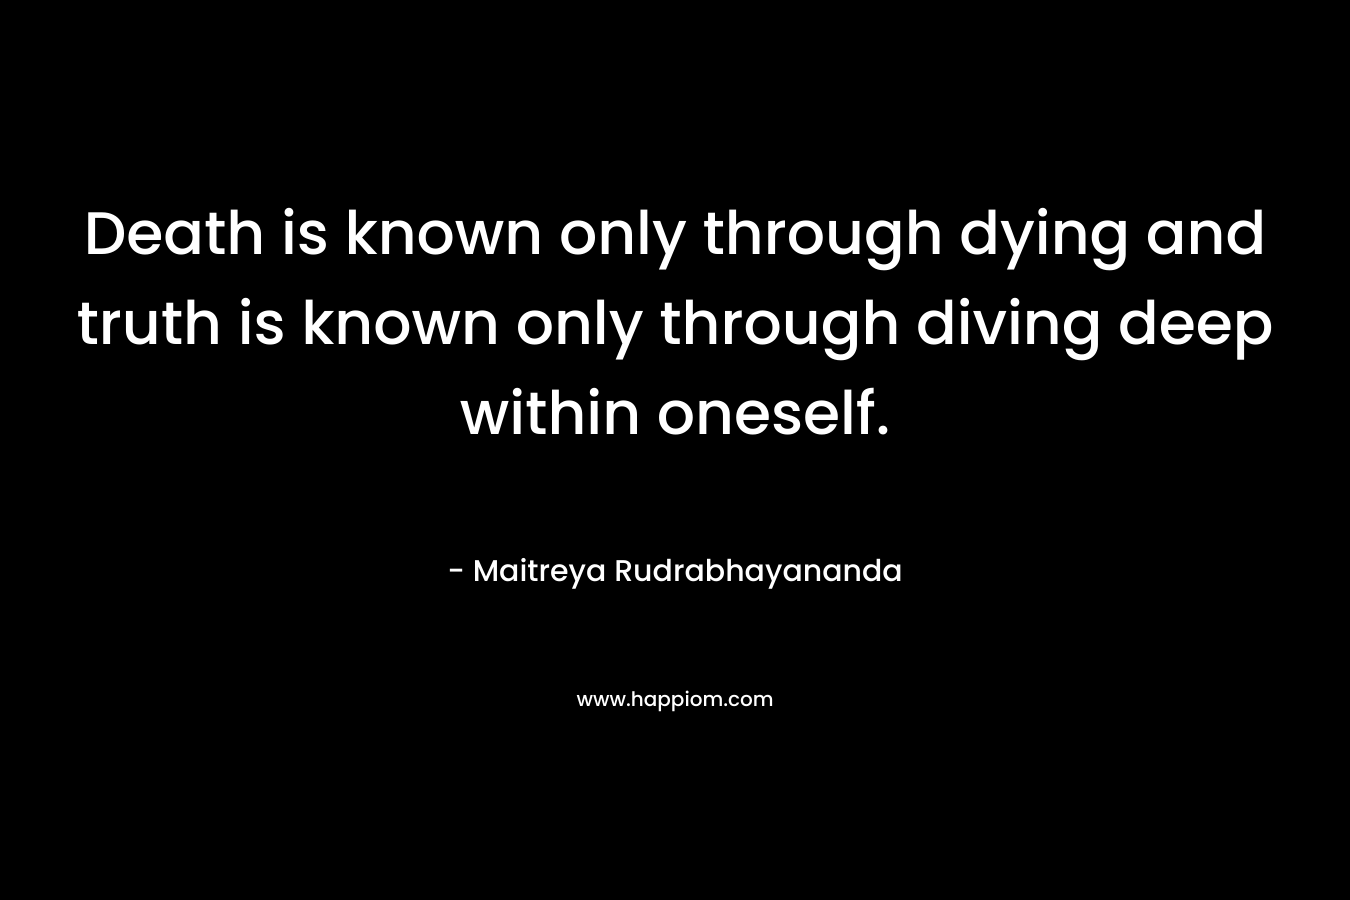 Death is known only through dying and truth is known only through diving deep within oneself. – Maitreya Rudrabhayananda